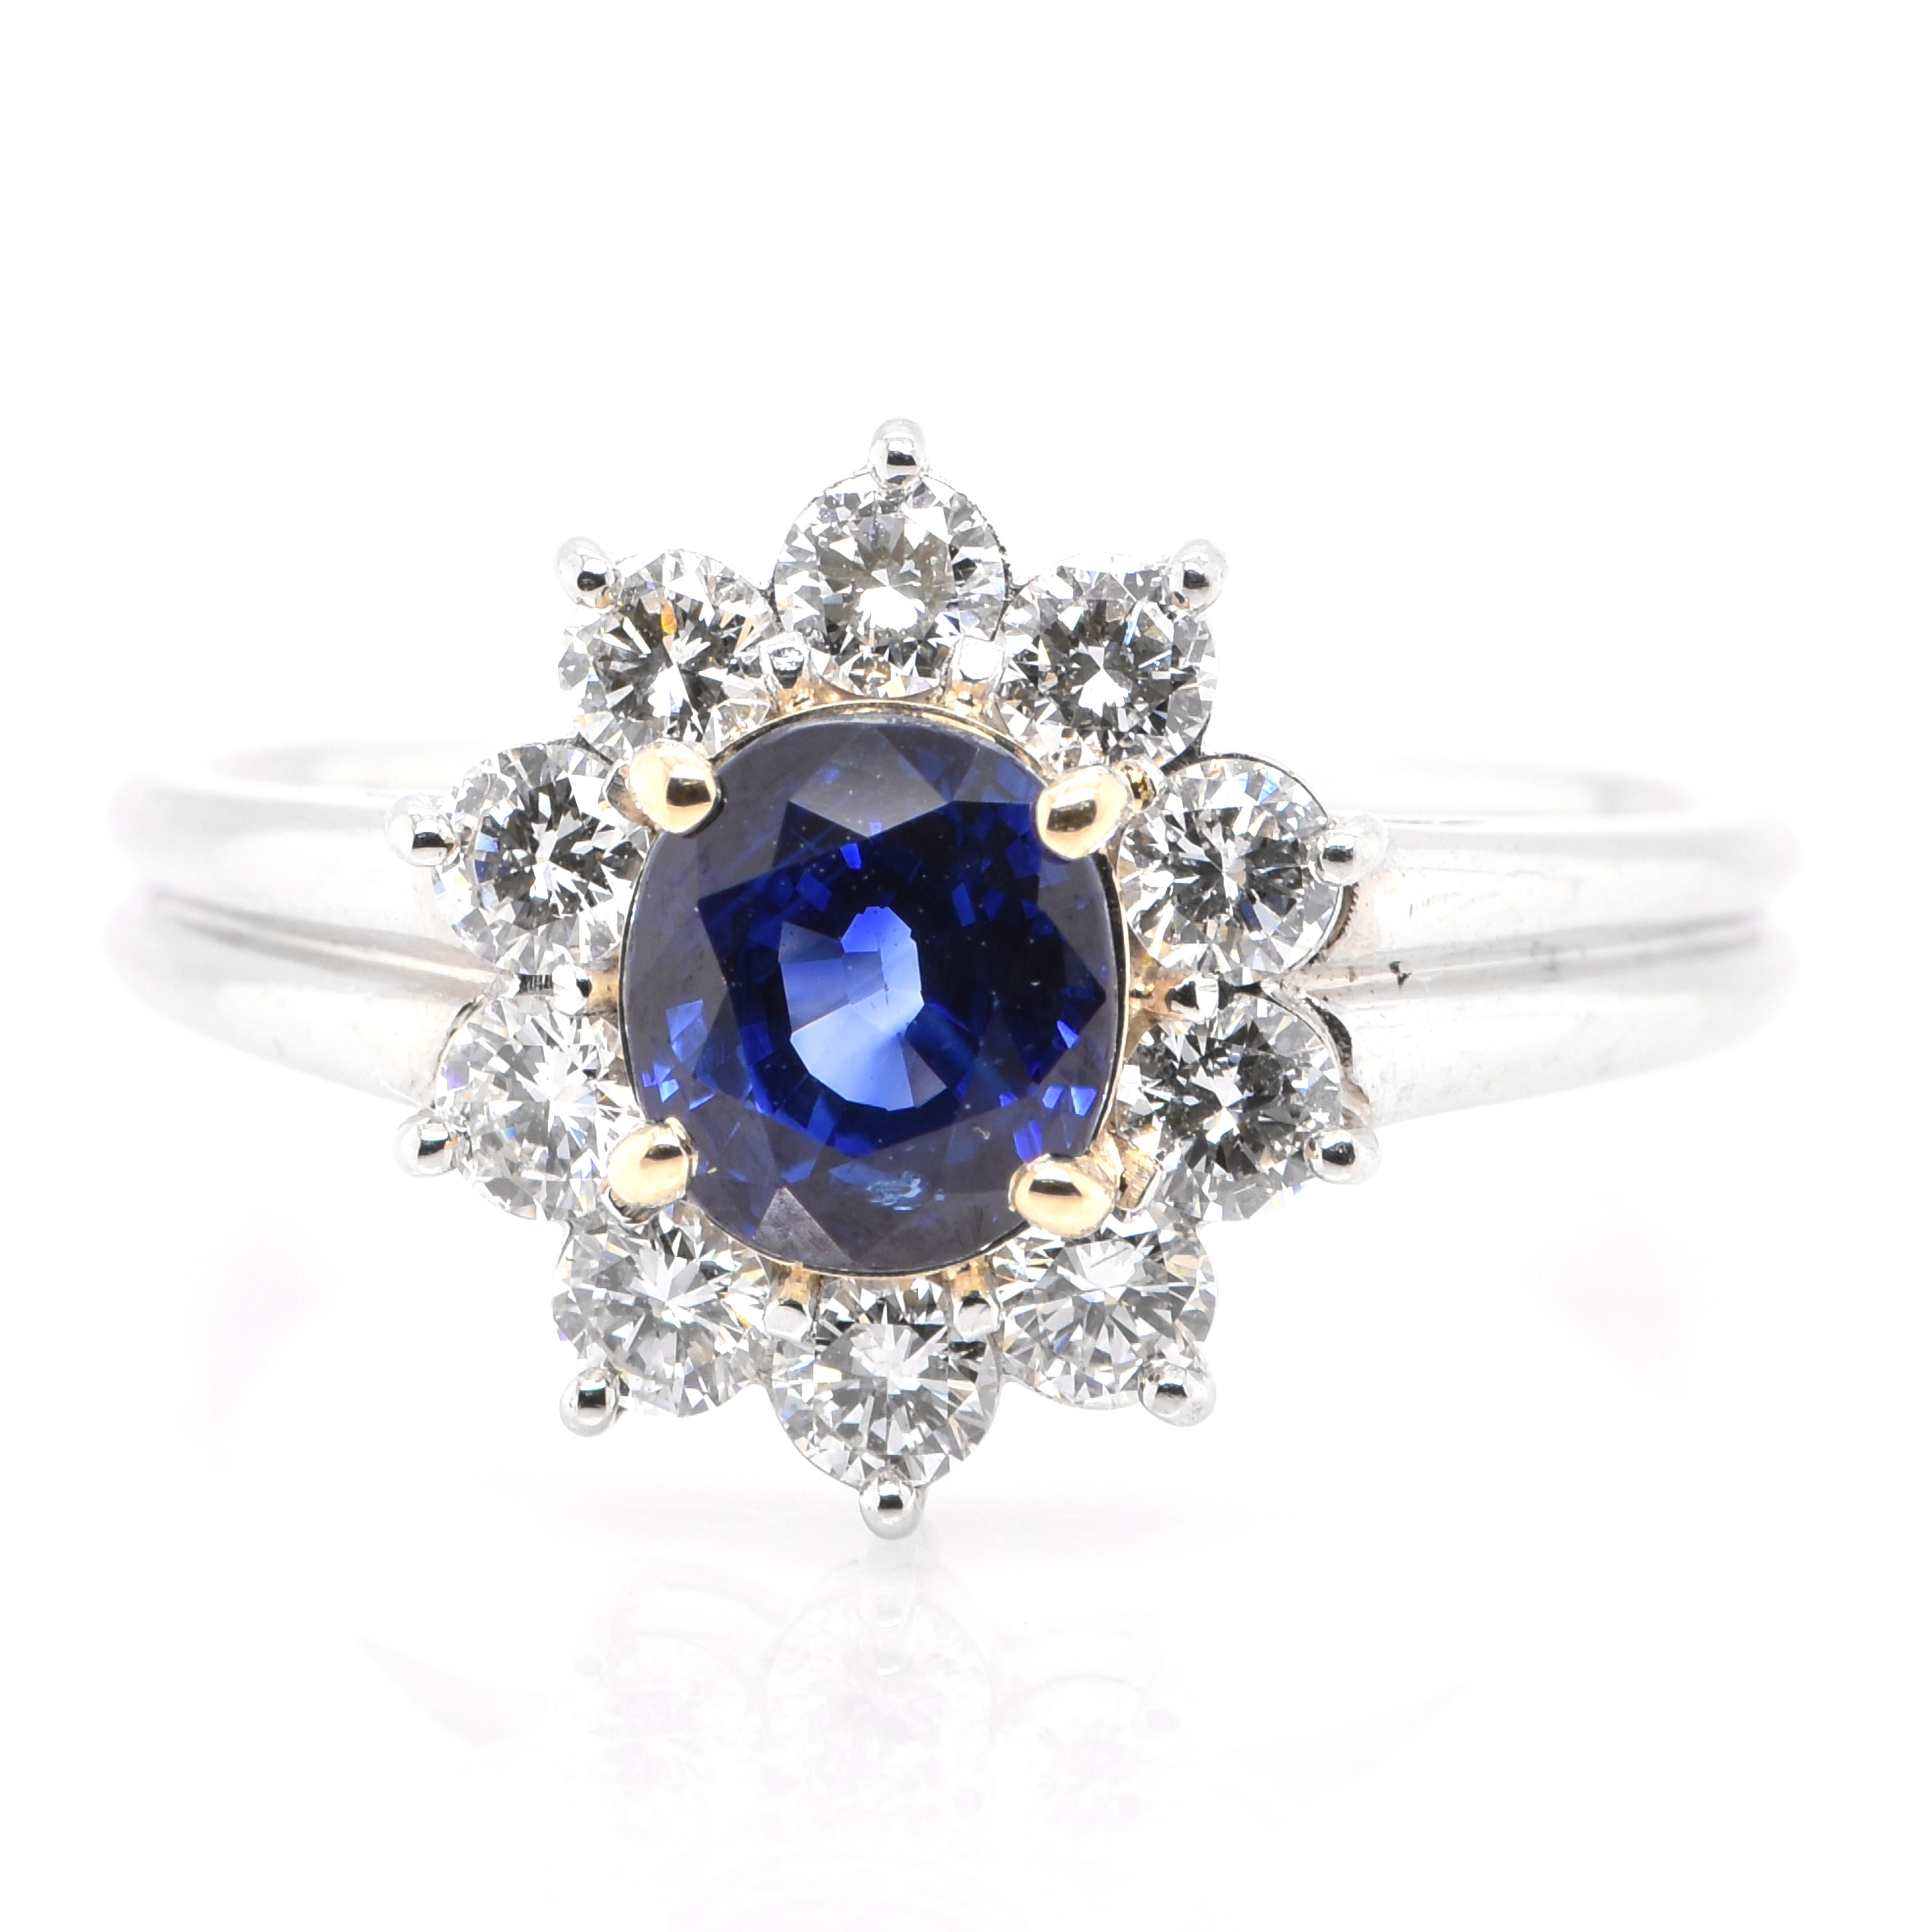 A beautiful ring featuring a 1.53 Carat Natural Blue Sapphire and 0.58 Carats Diamond Accents set in Platinum and 18K Gold. Sapphires have extraordinary durability - they excel in hardness as well as toughness and durability making them very popular